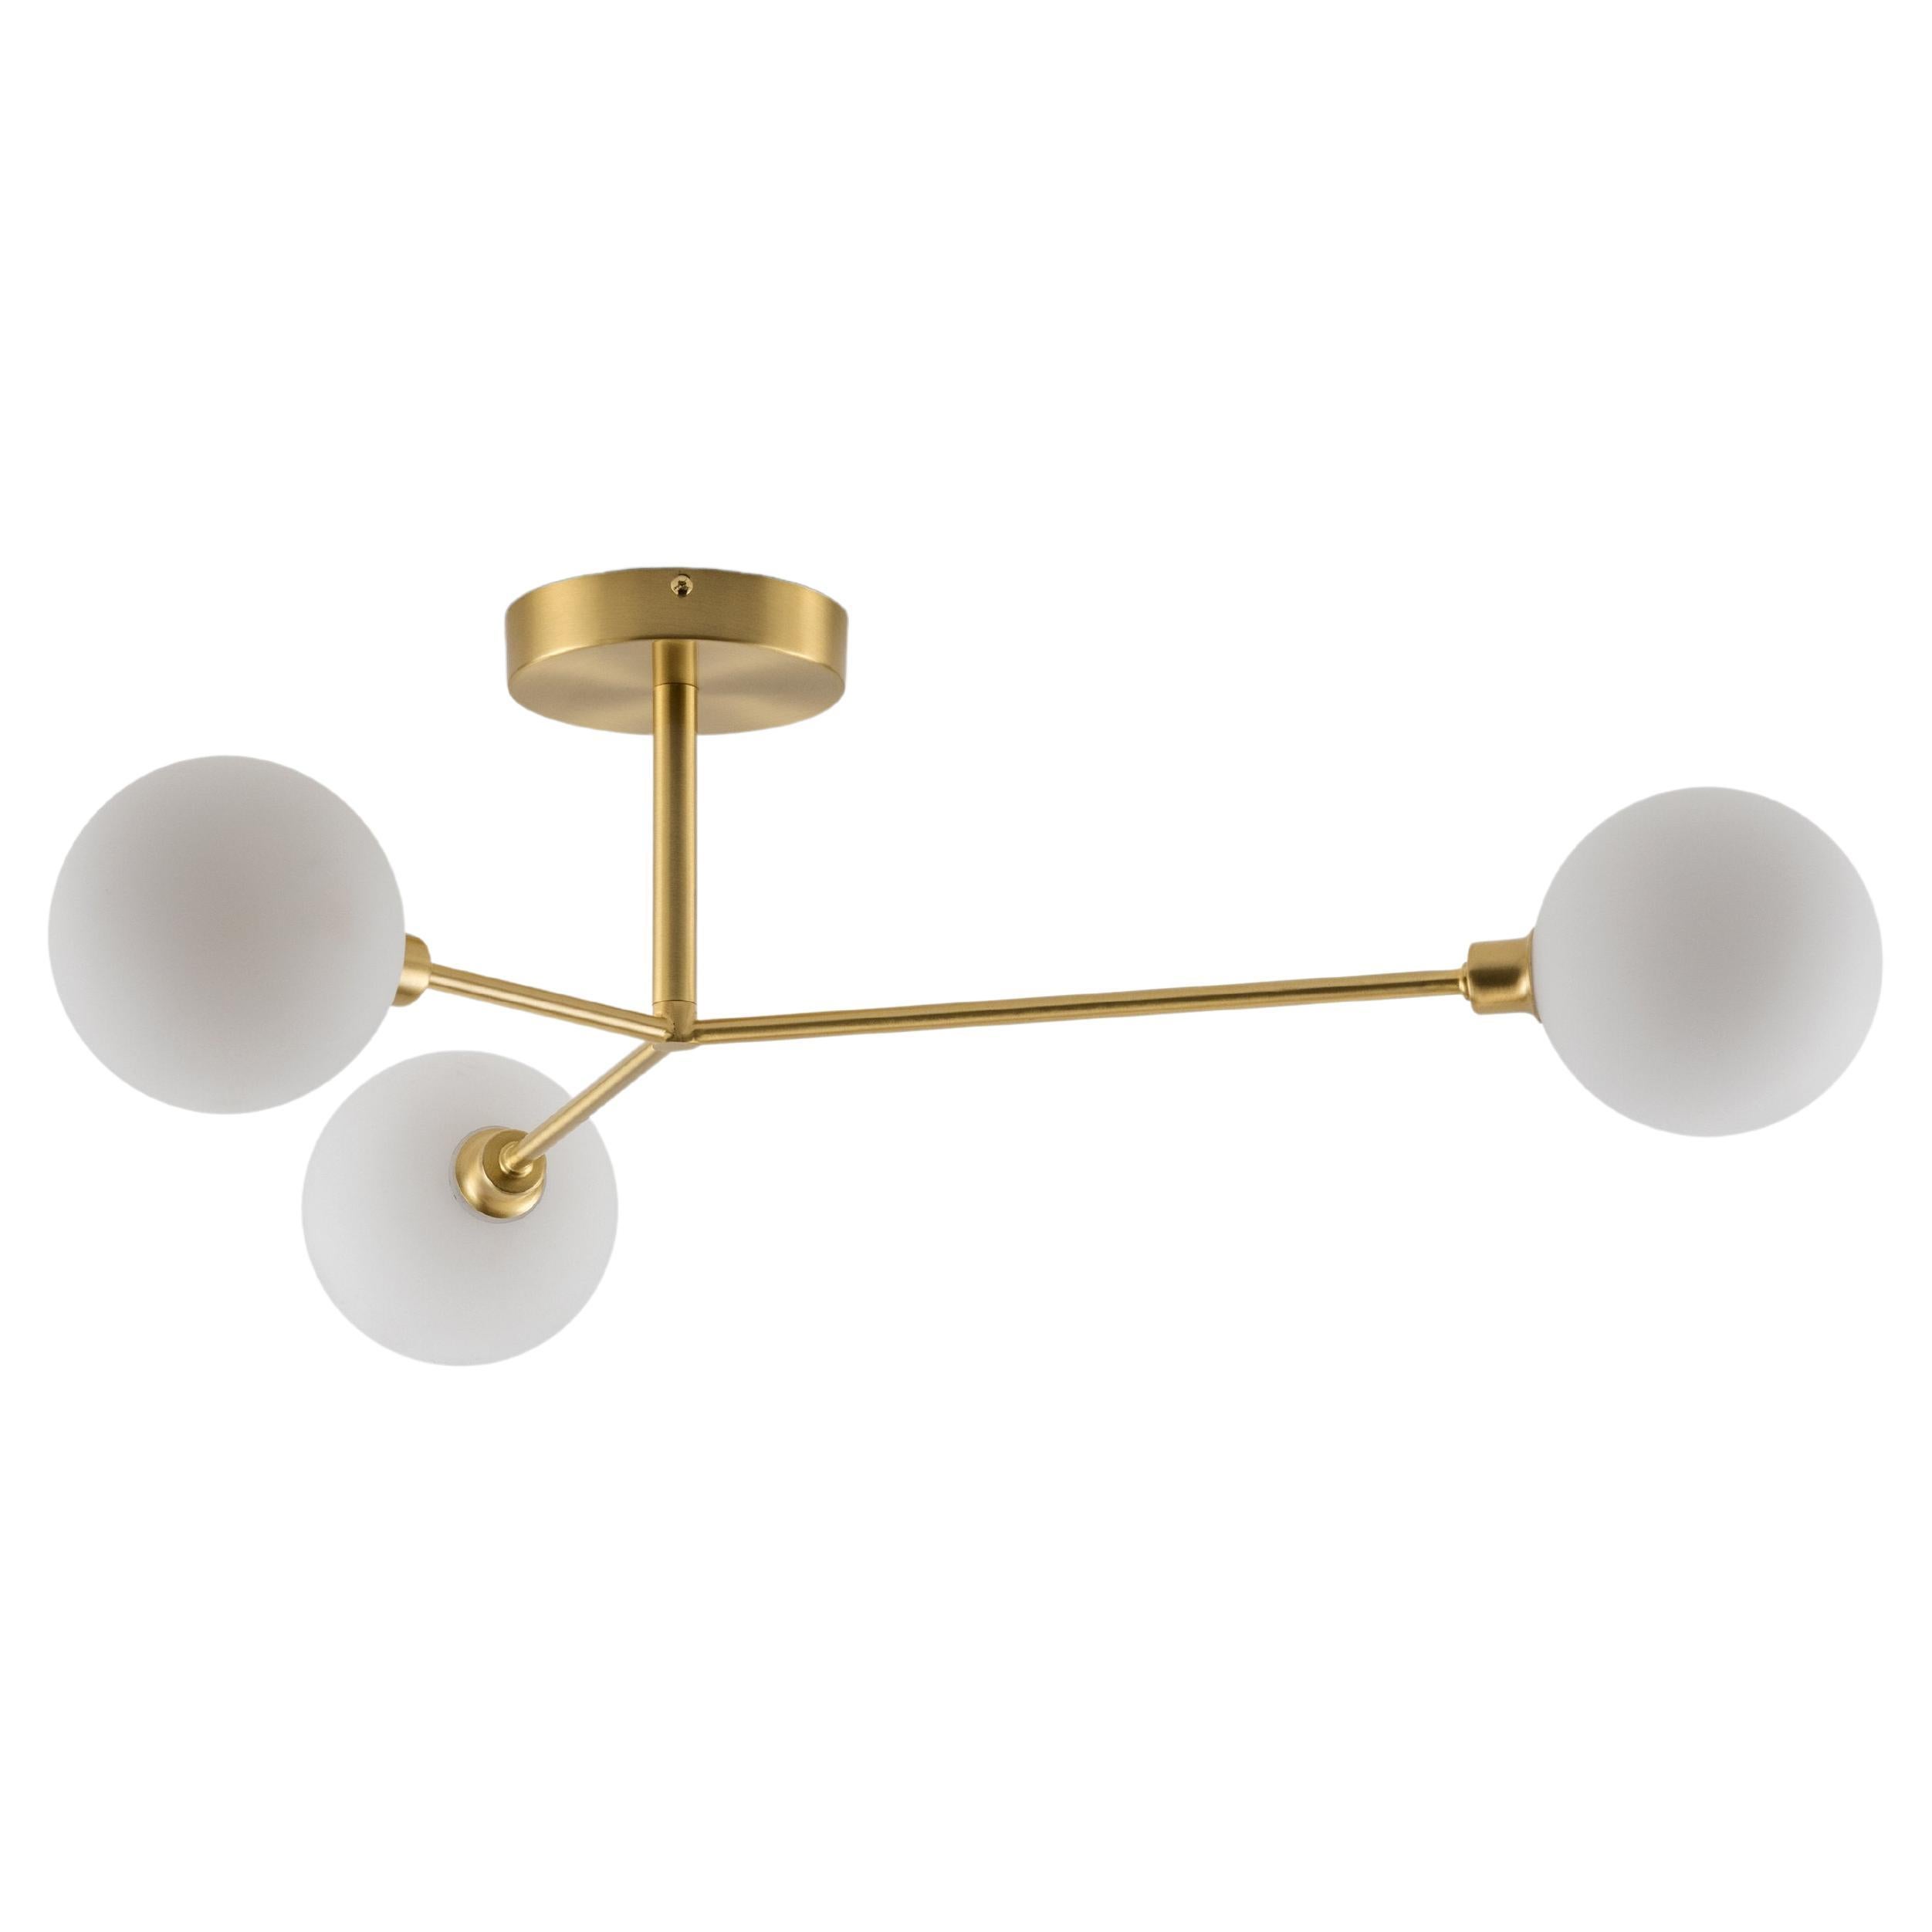 House of Brass 3 Light Flush Ceiling Light with Metal and Glass Shades For Sale